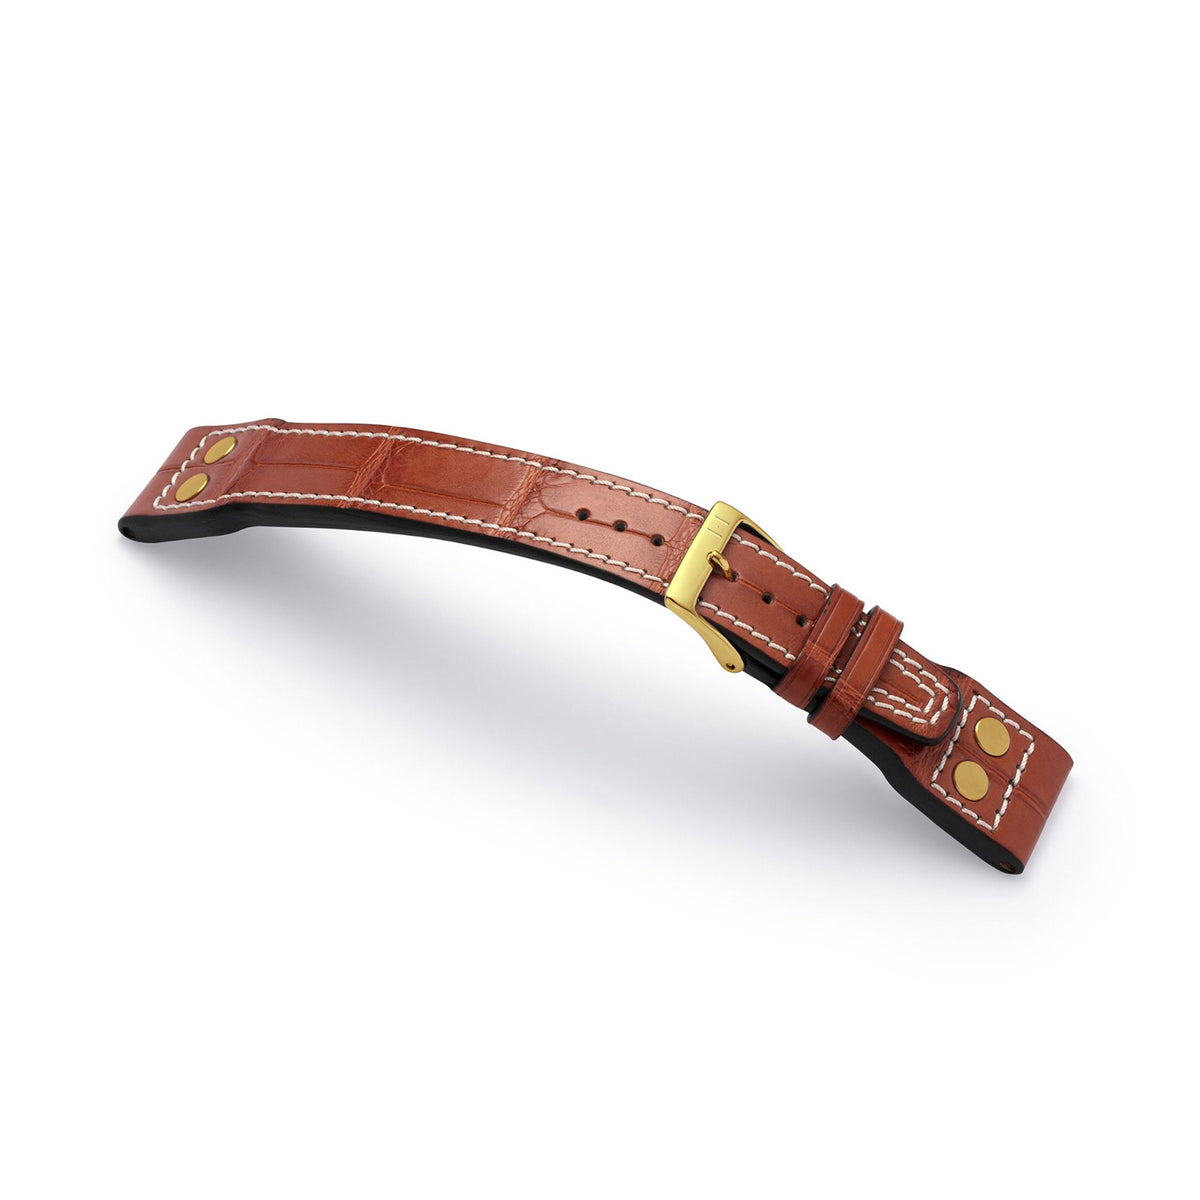 Alligator watch strap for large pilot&#39;s watch - compatible strap for the IWC BIG PILOT (strap not from IWC) - gold clasp